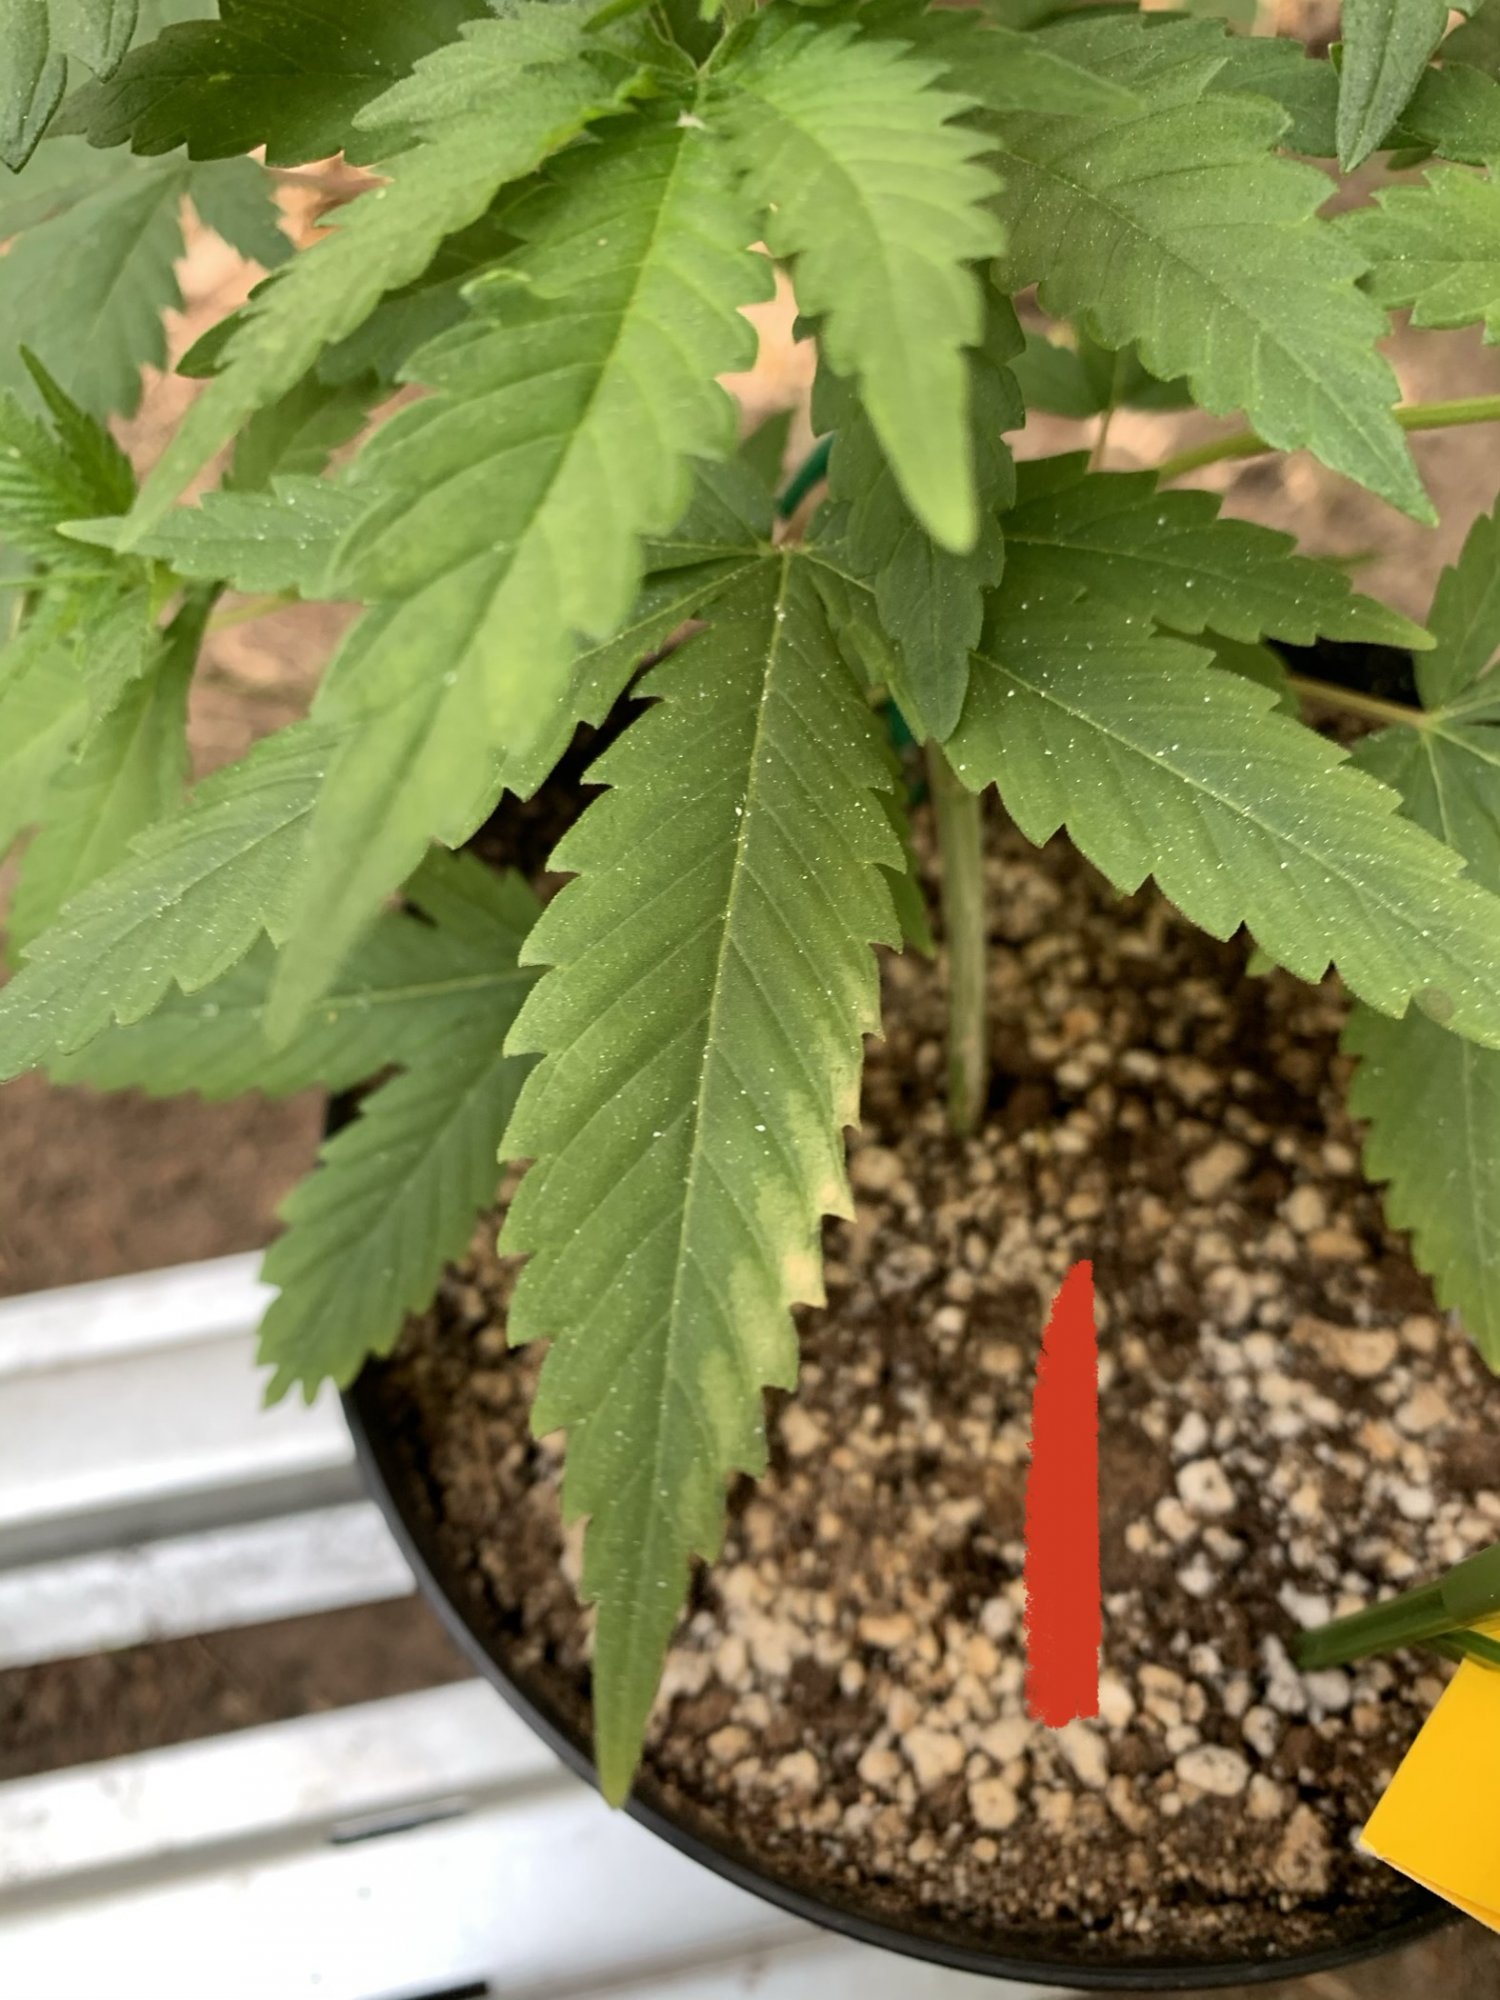 The game guess that deficiency